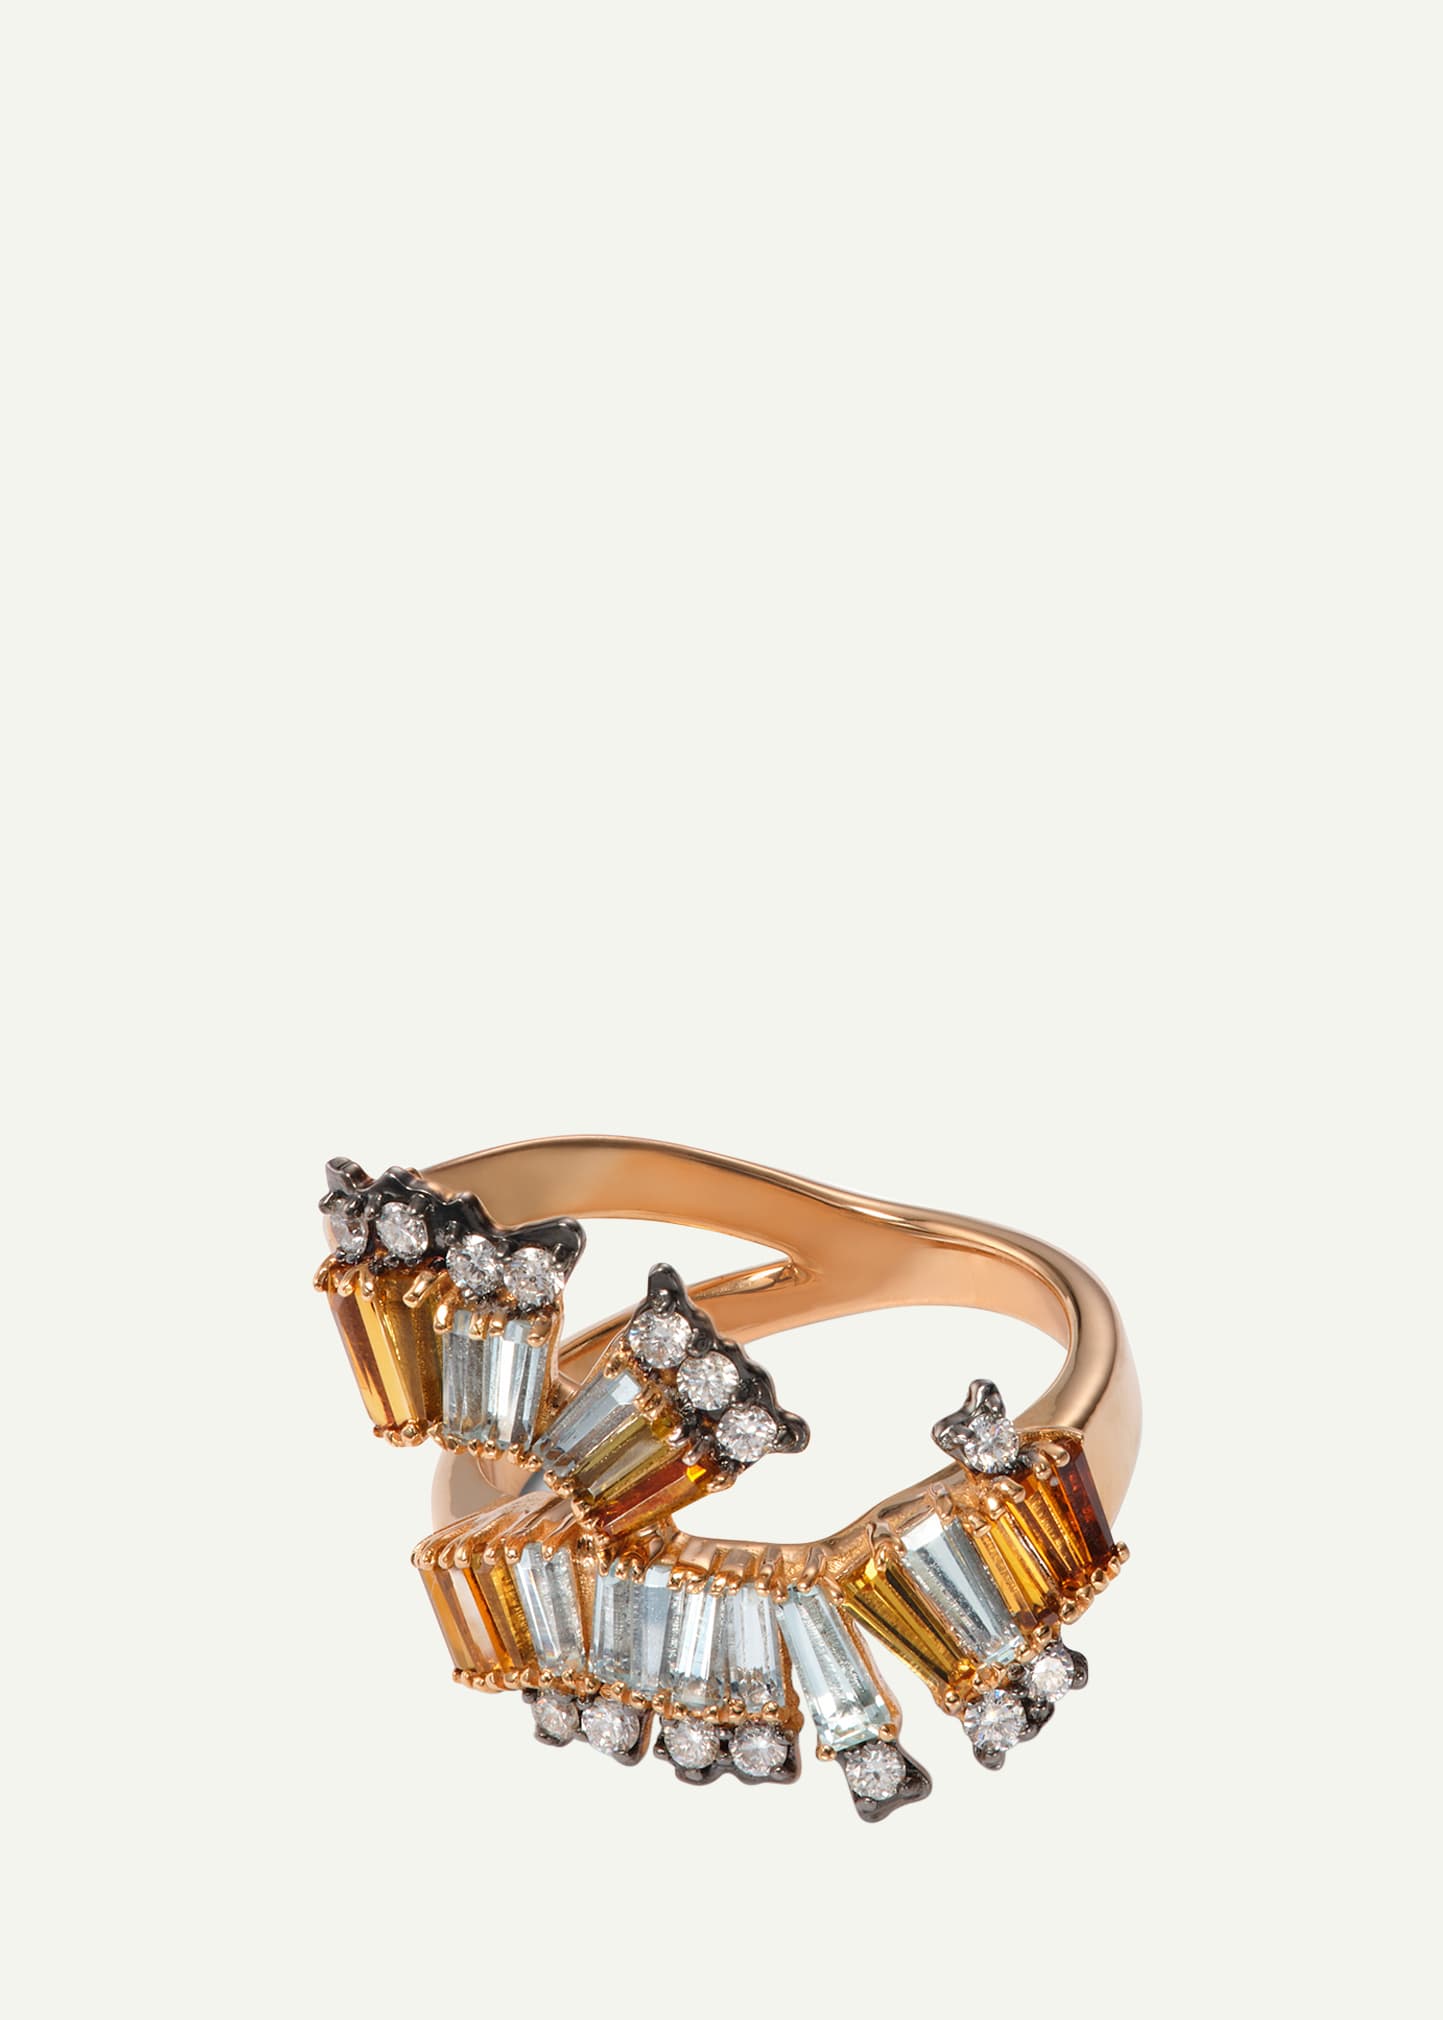 20K Rose Gold Y Ruched Ring with White Diamonds, Golden Tourmaline and Aquamarine